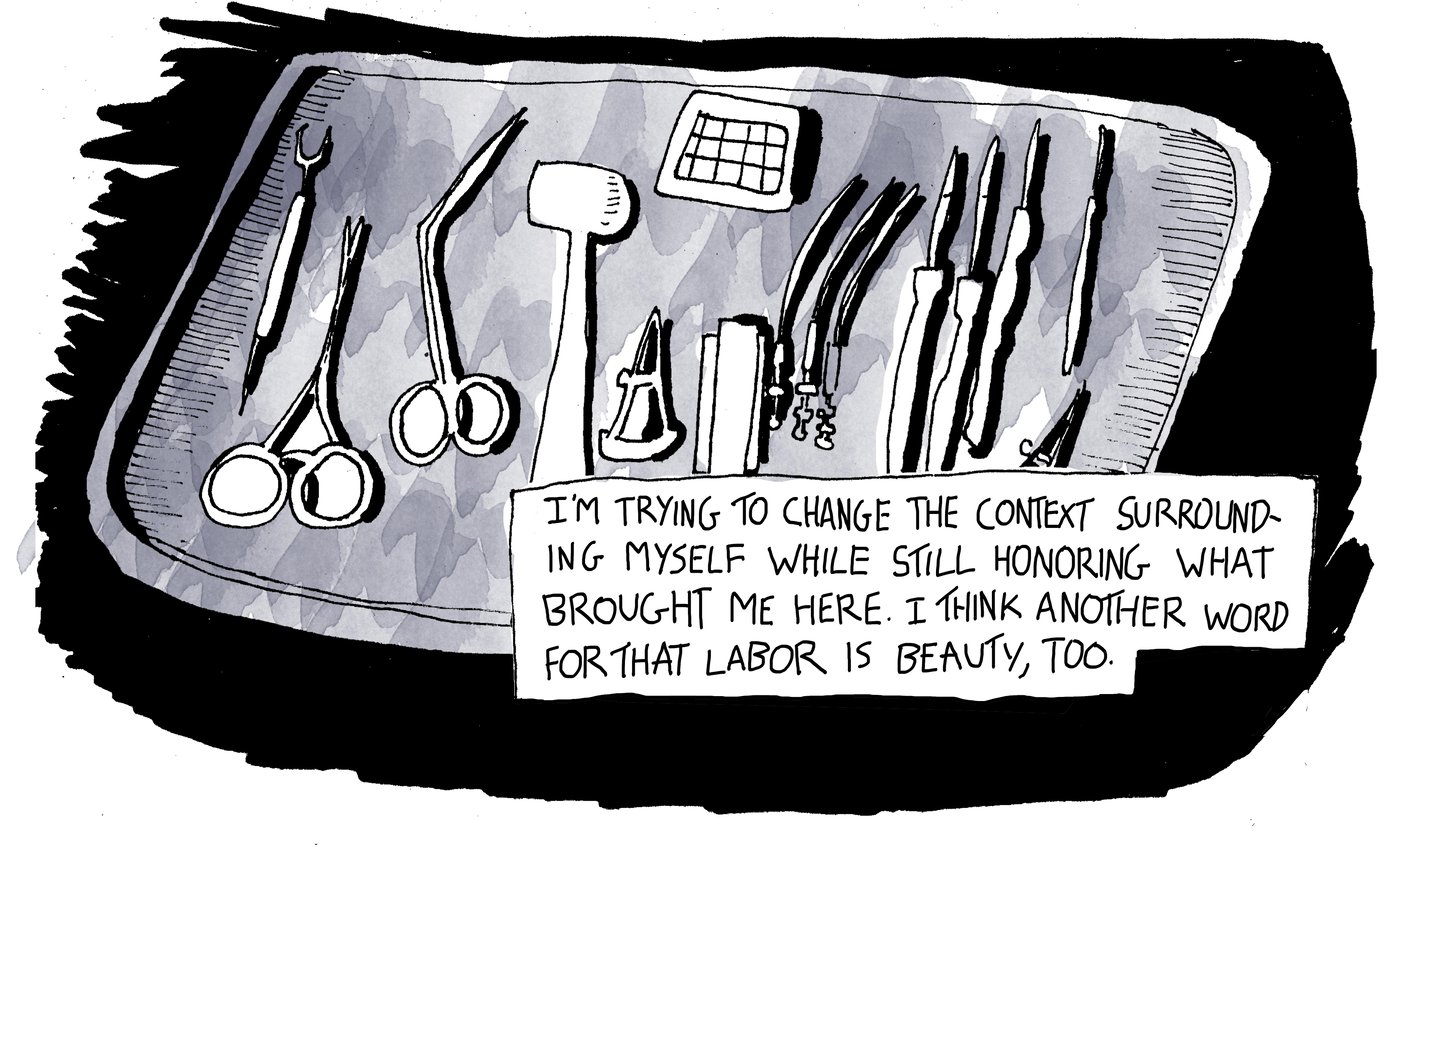 Page 7, panel one: there is a drawing of a surgical platter against a black background. On the platter her number of surgical instruments. The text reads, “I’m trying to change the context surrounding myself while still honoring what brought me here. I think another word for that labor is beauty, too.”